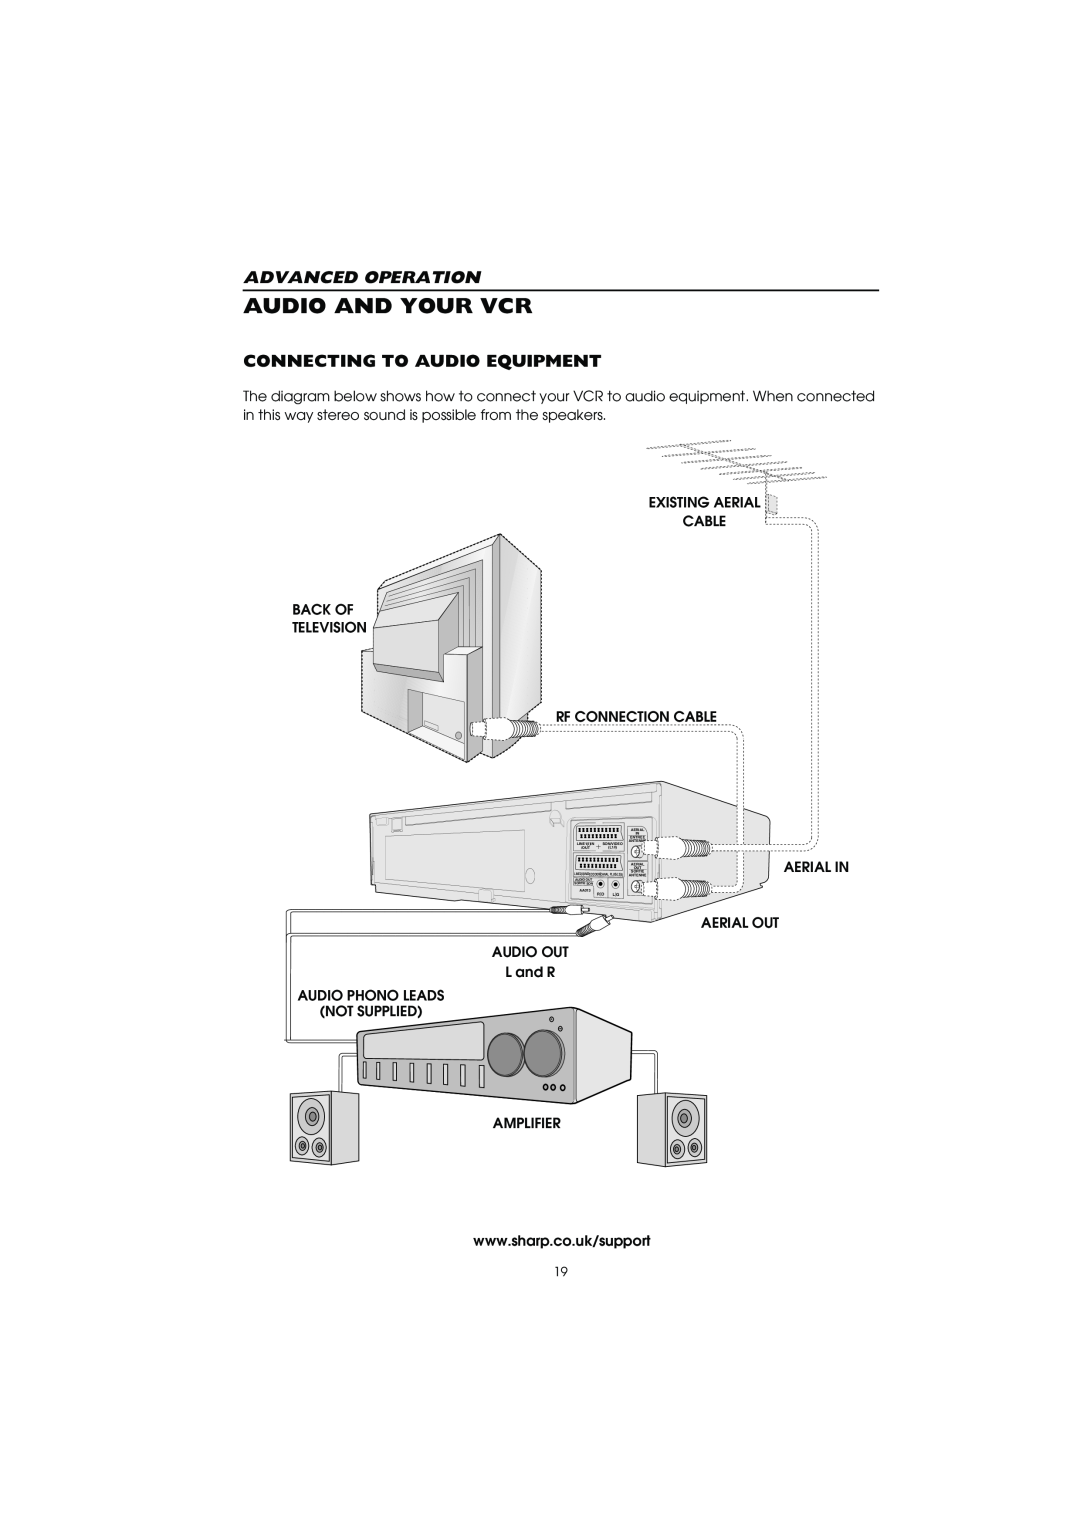 Sharp VC-MH715HM operation manual Audio And Your Vcr, Advanced Operation, Connecting To Audio Equipment 